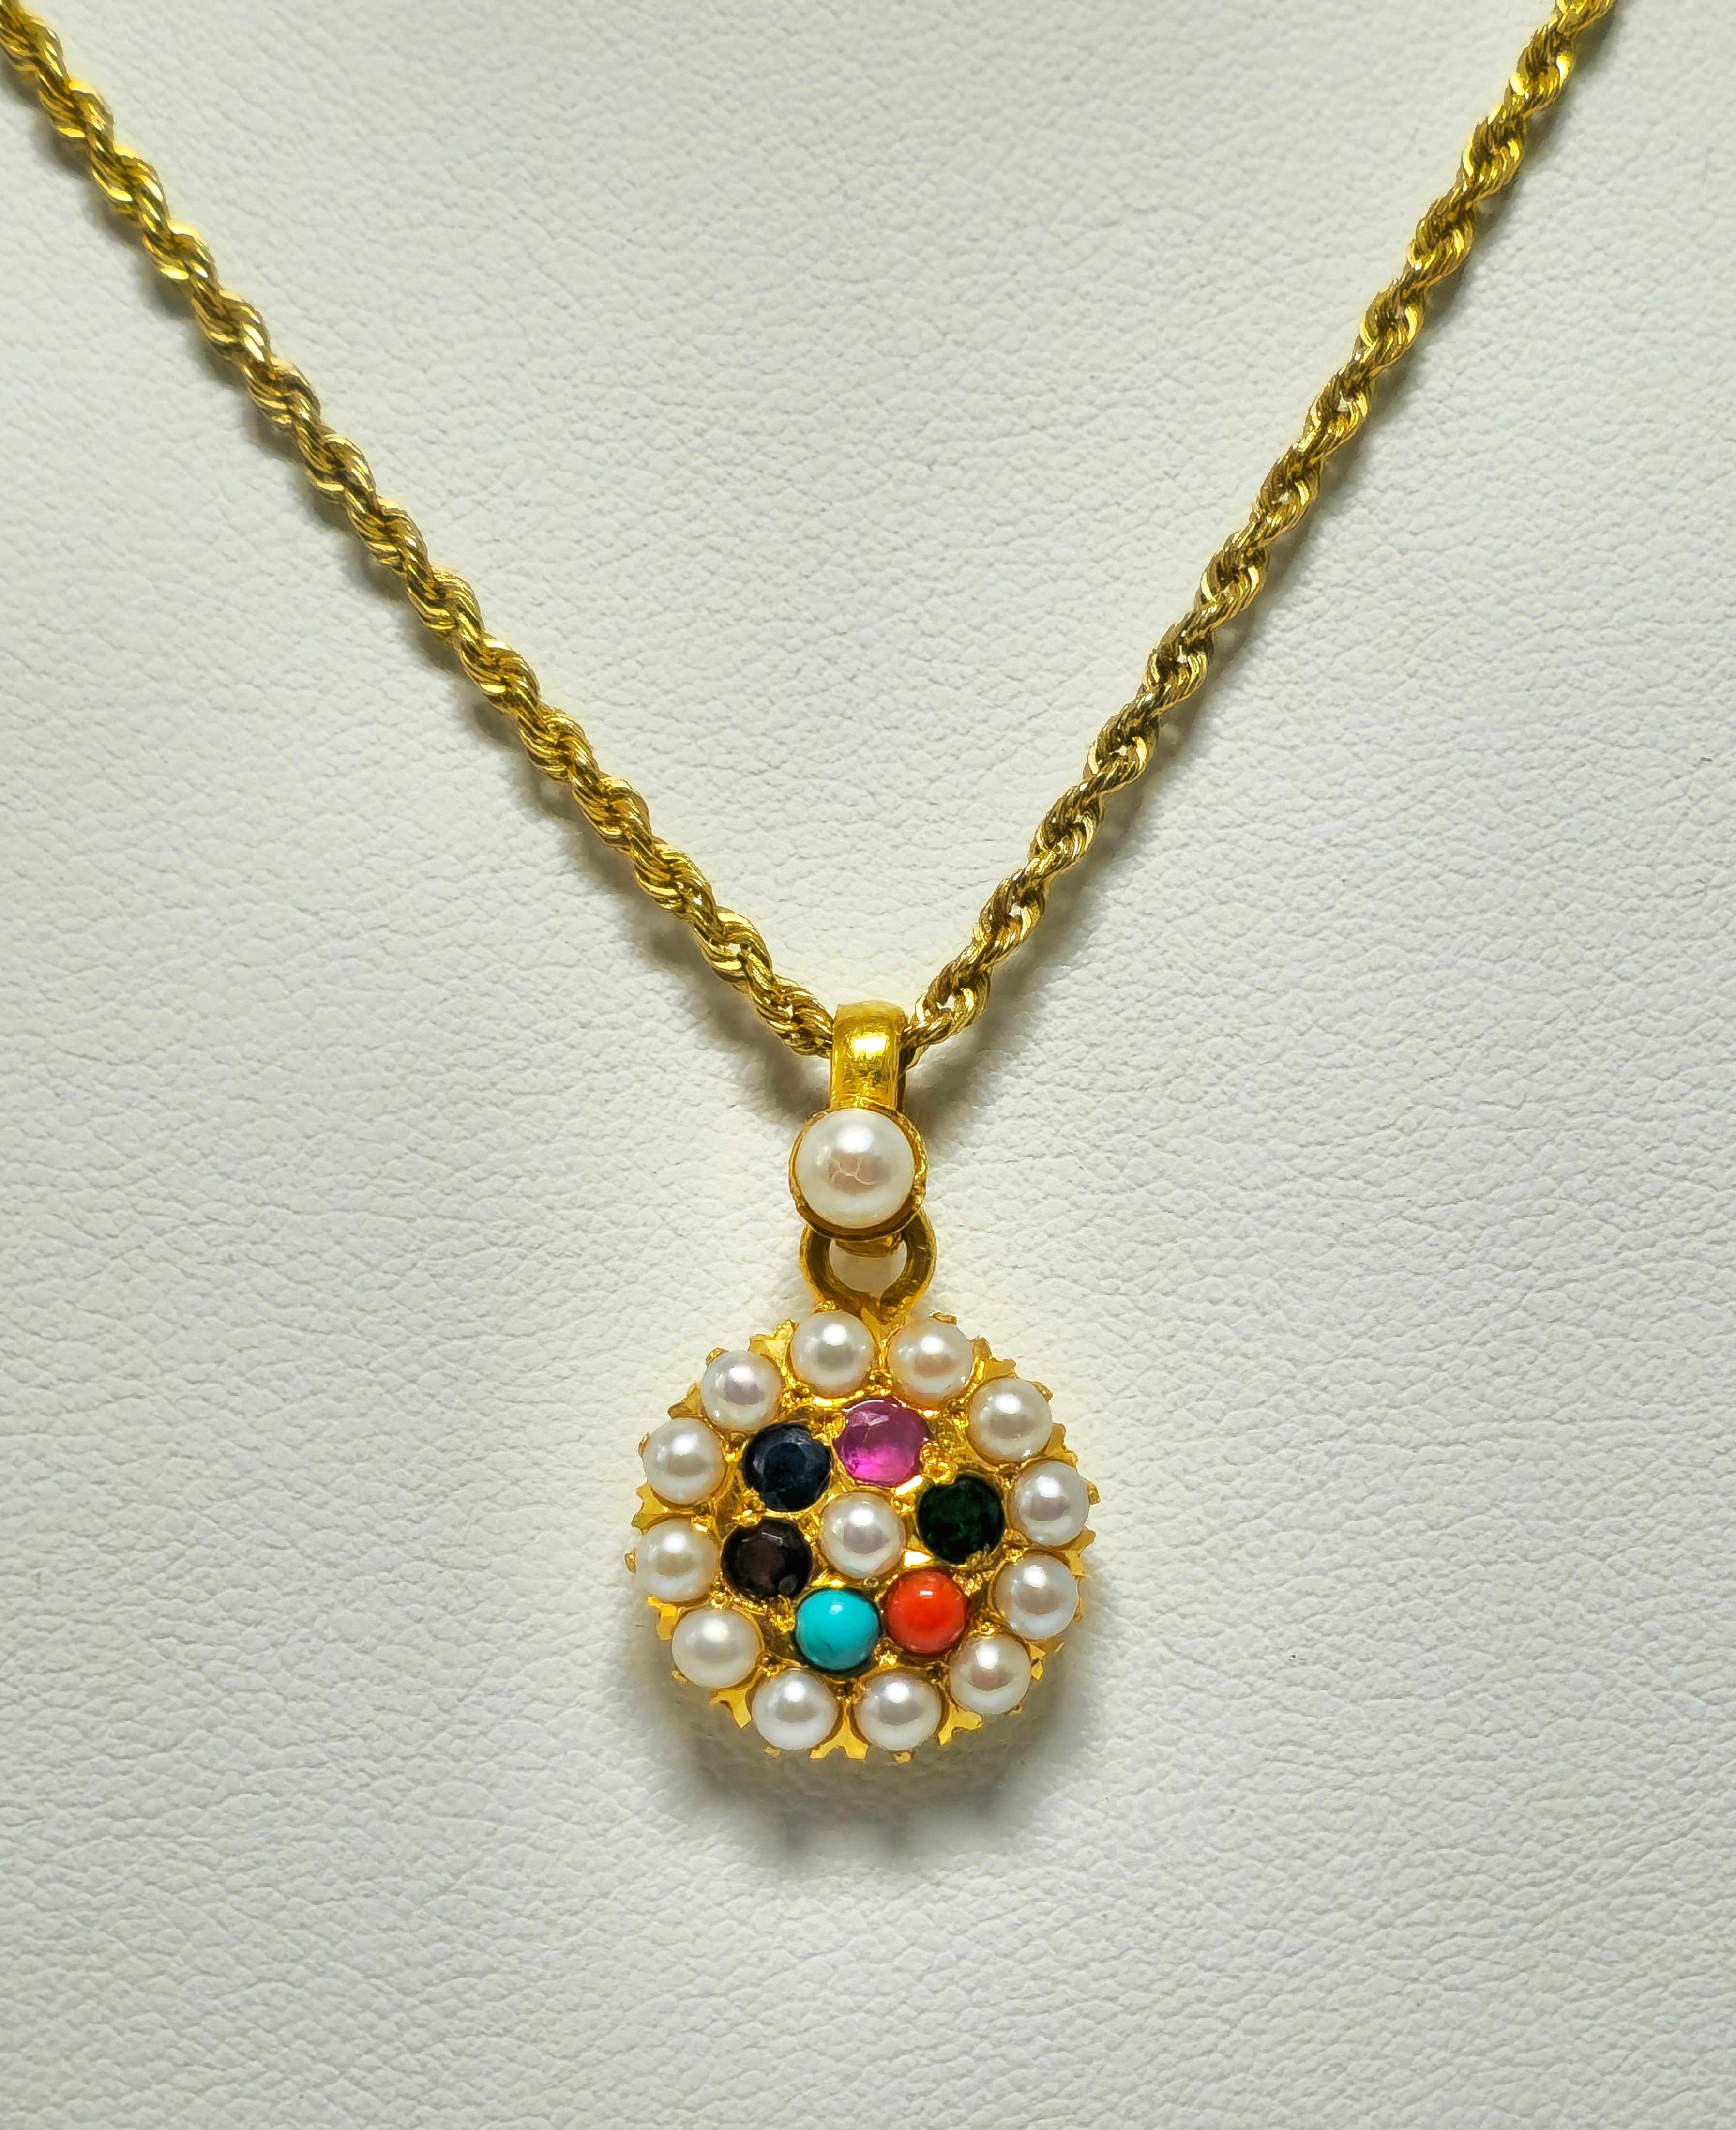 Medieval Mughal Empire Style Vintage 22k Yellow Gold Multigemstone Pendant For Sale